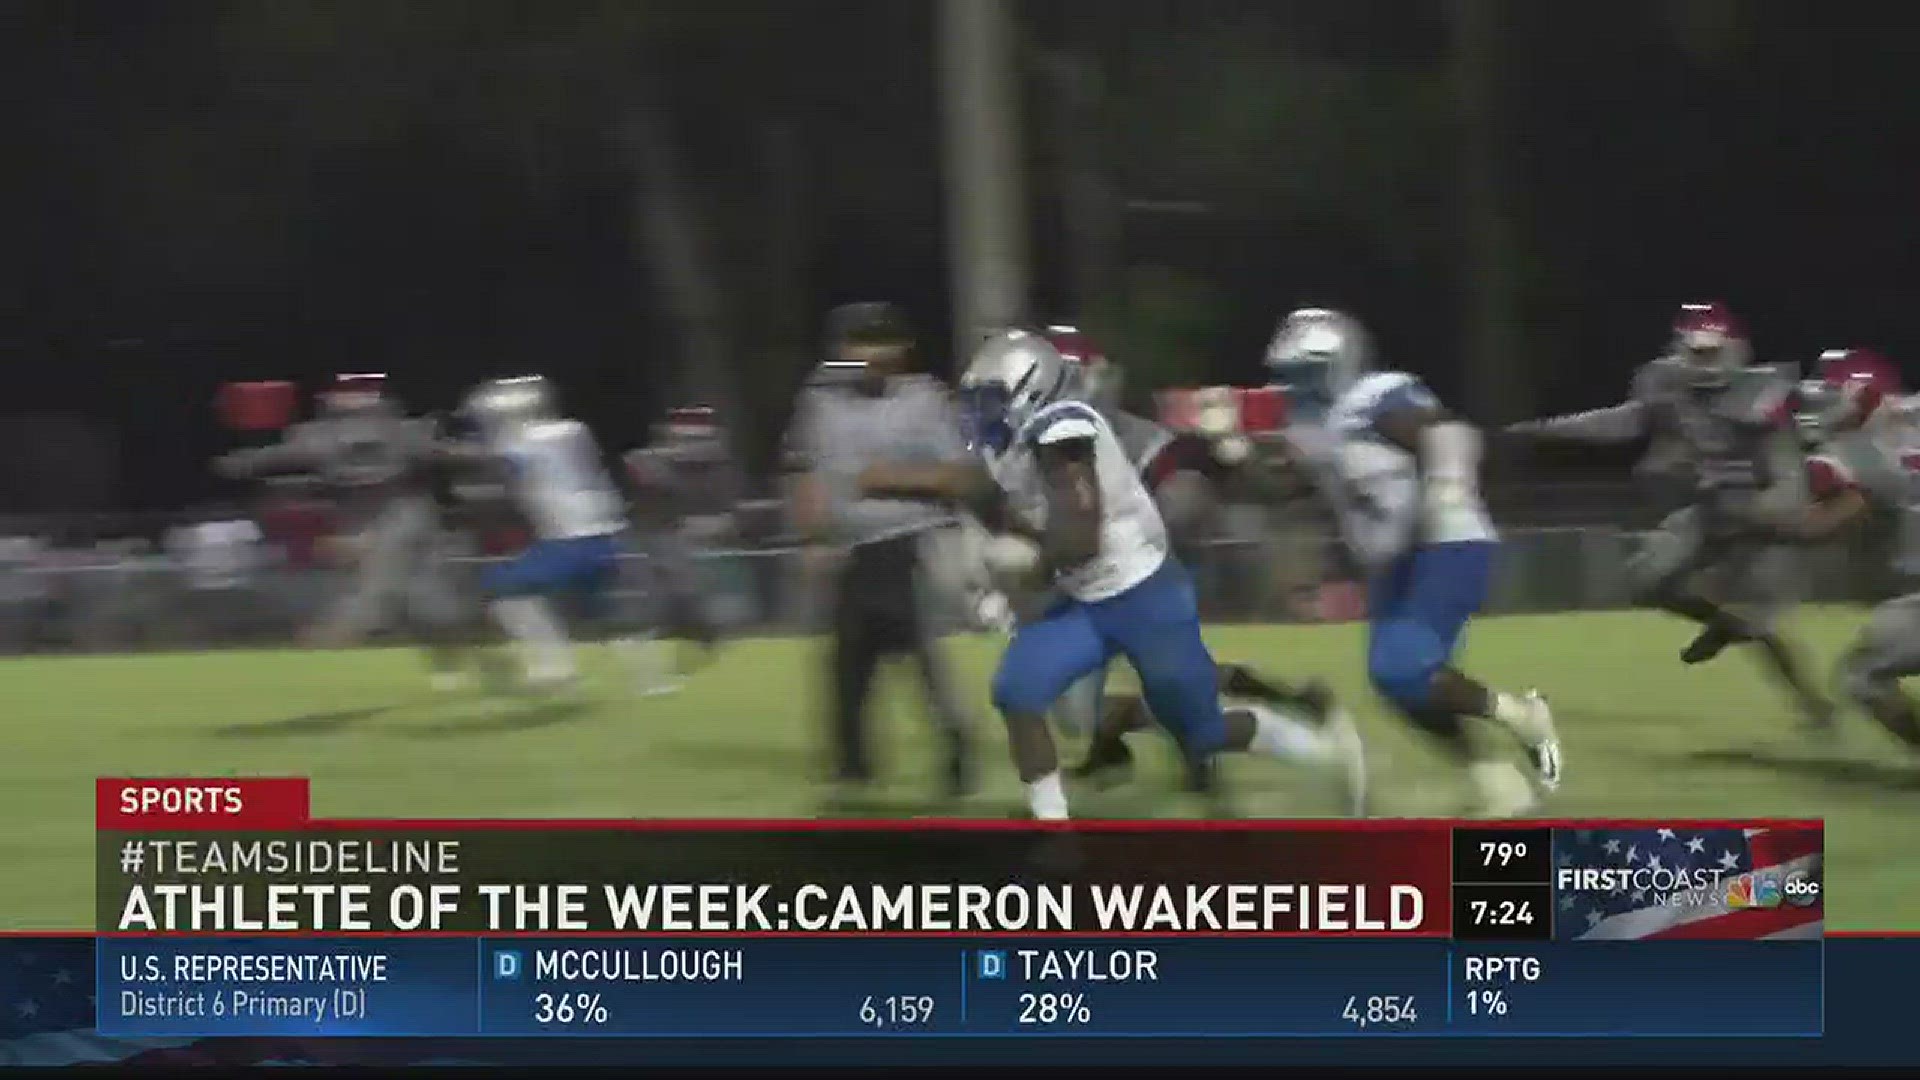 Cameron Wakefield from Lee High School earns the honor